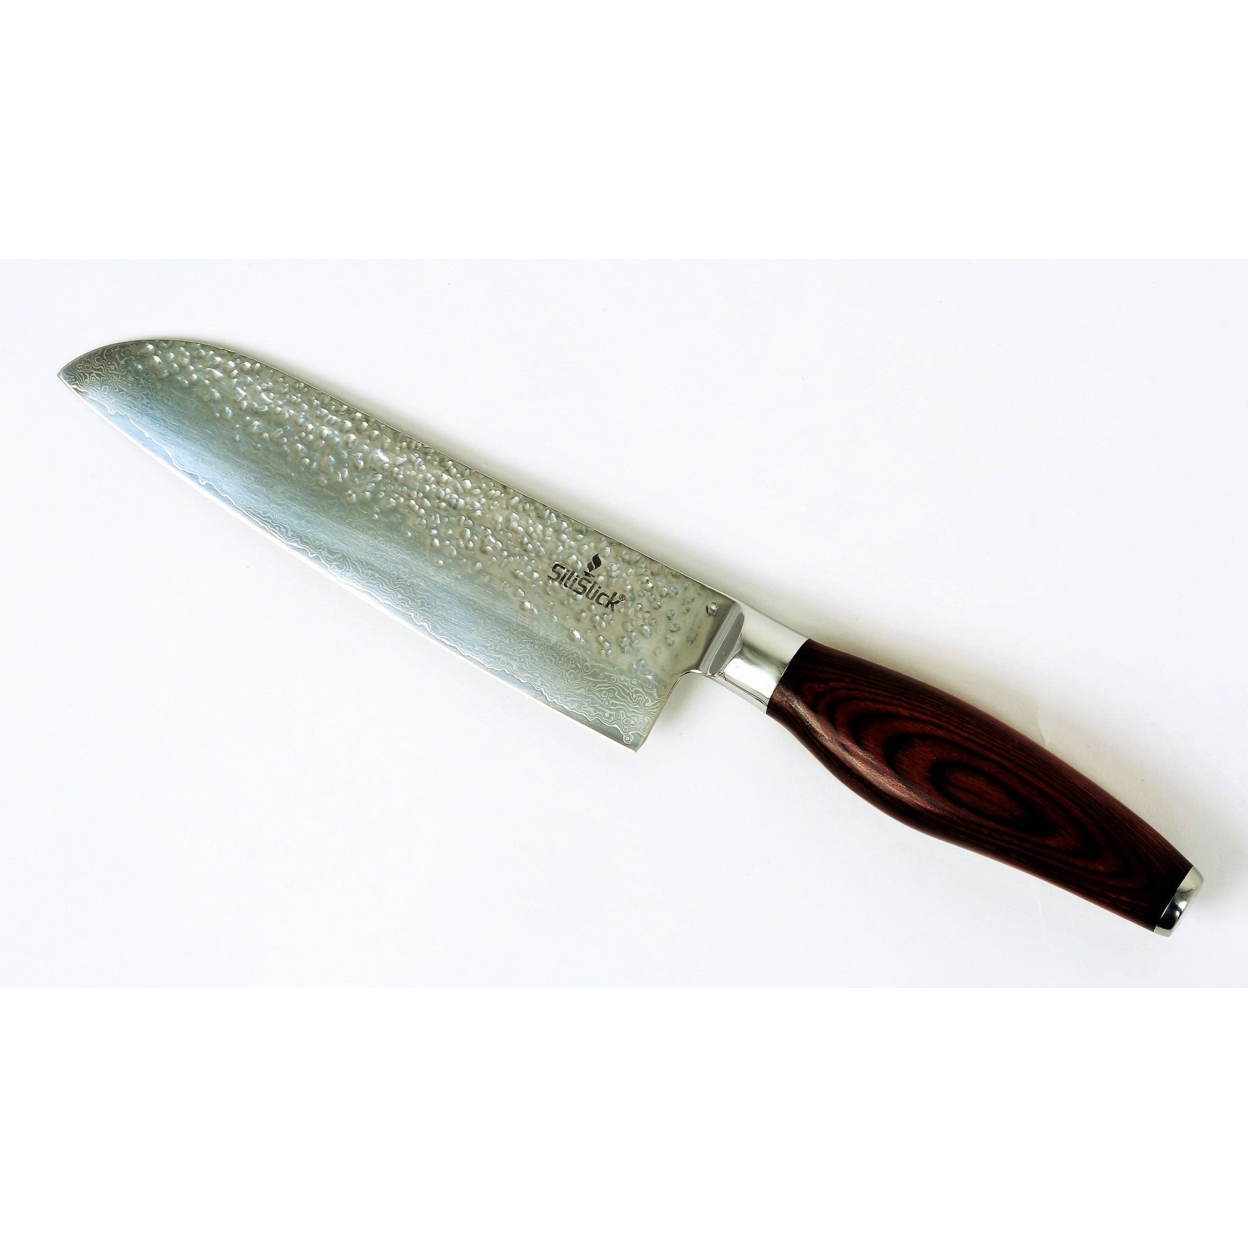 Damascus High Carbon Japanese Stainless Steel VG10 Santoku Hammered Surface 7.25 Blade